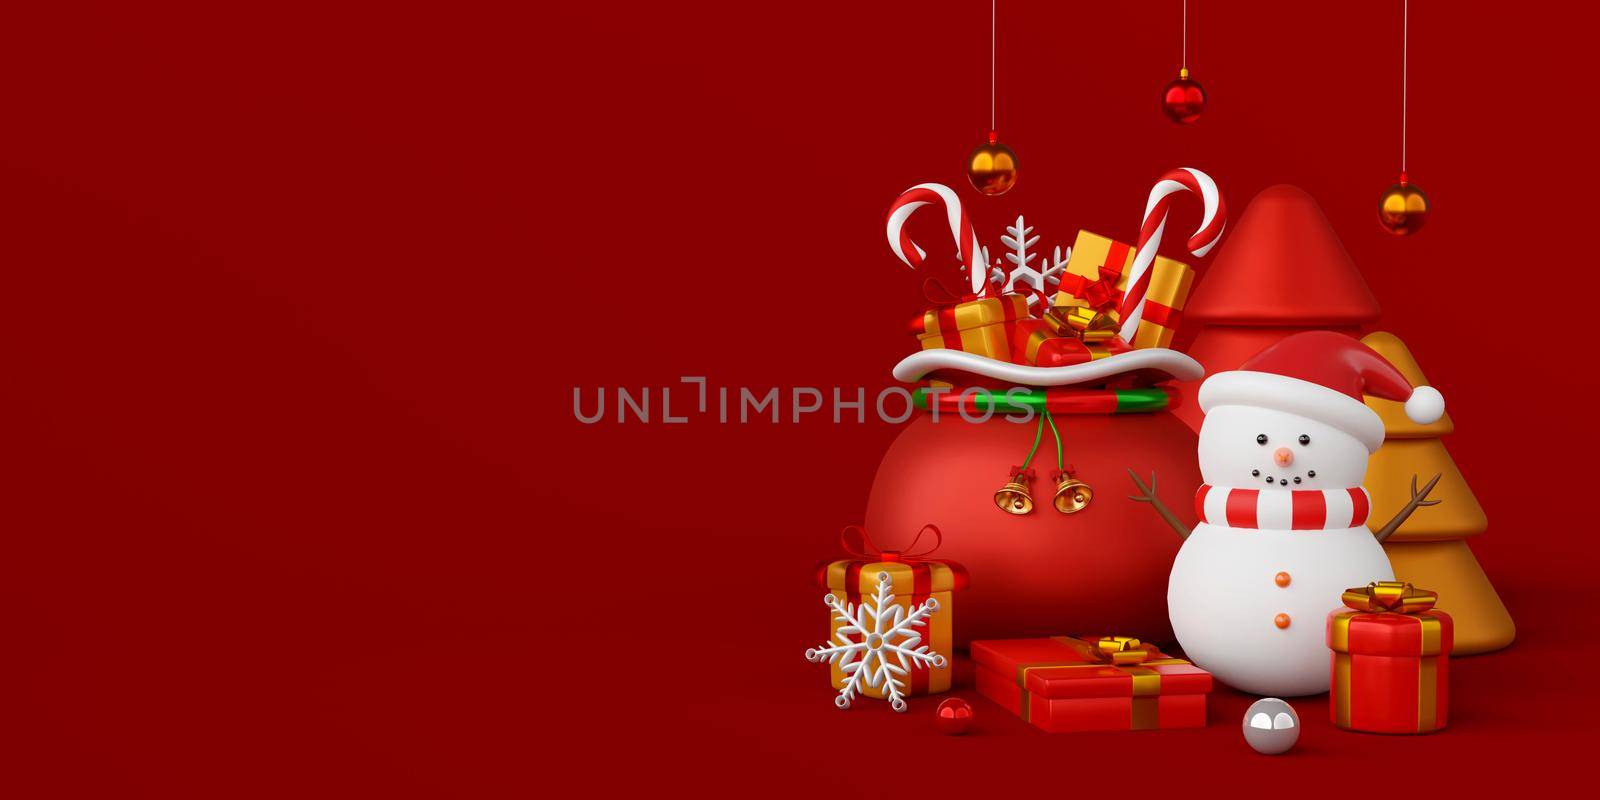 Christmas banner of snowman with Christmas bag and gifts, 3d illustration